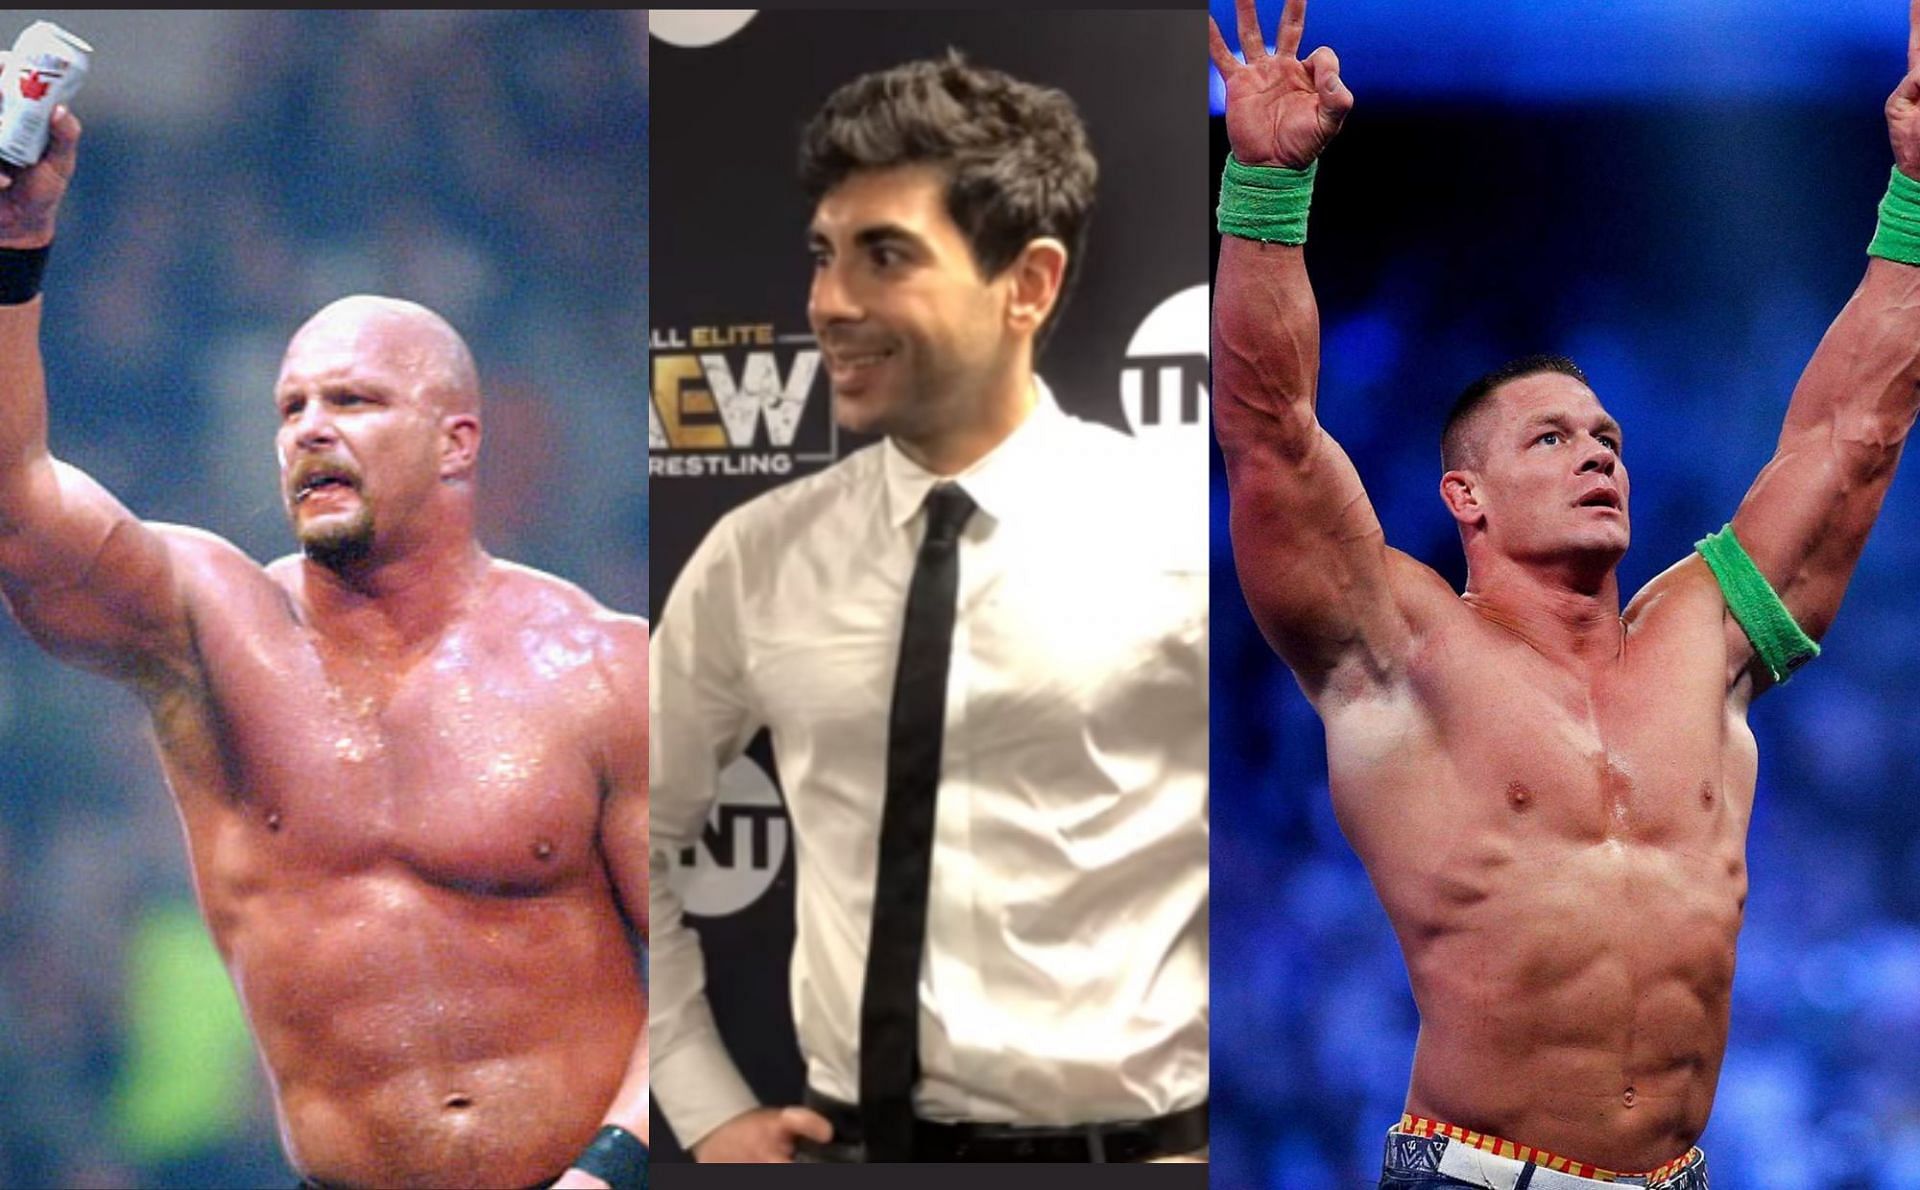 5 legendary WWE Superstars who might never show up in AEW